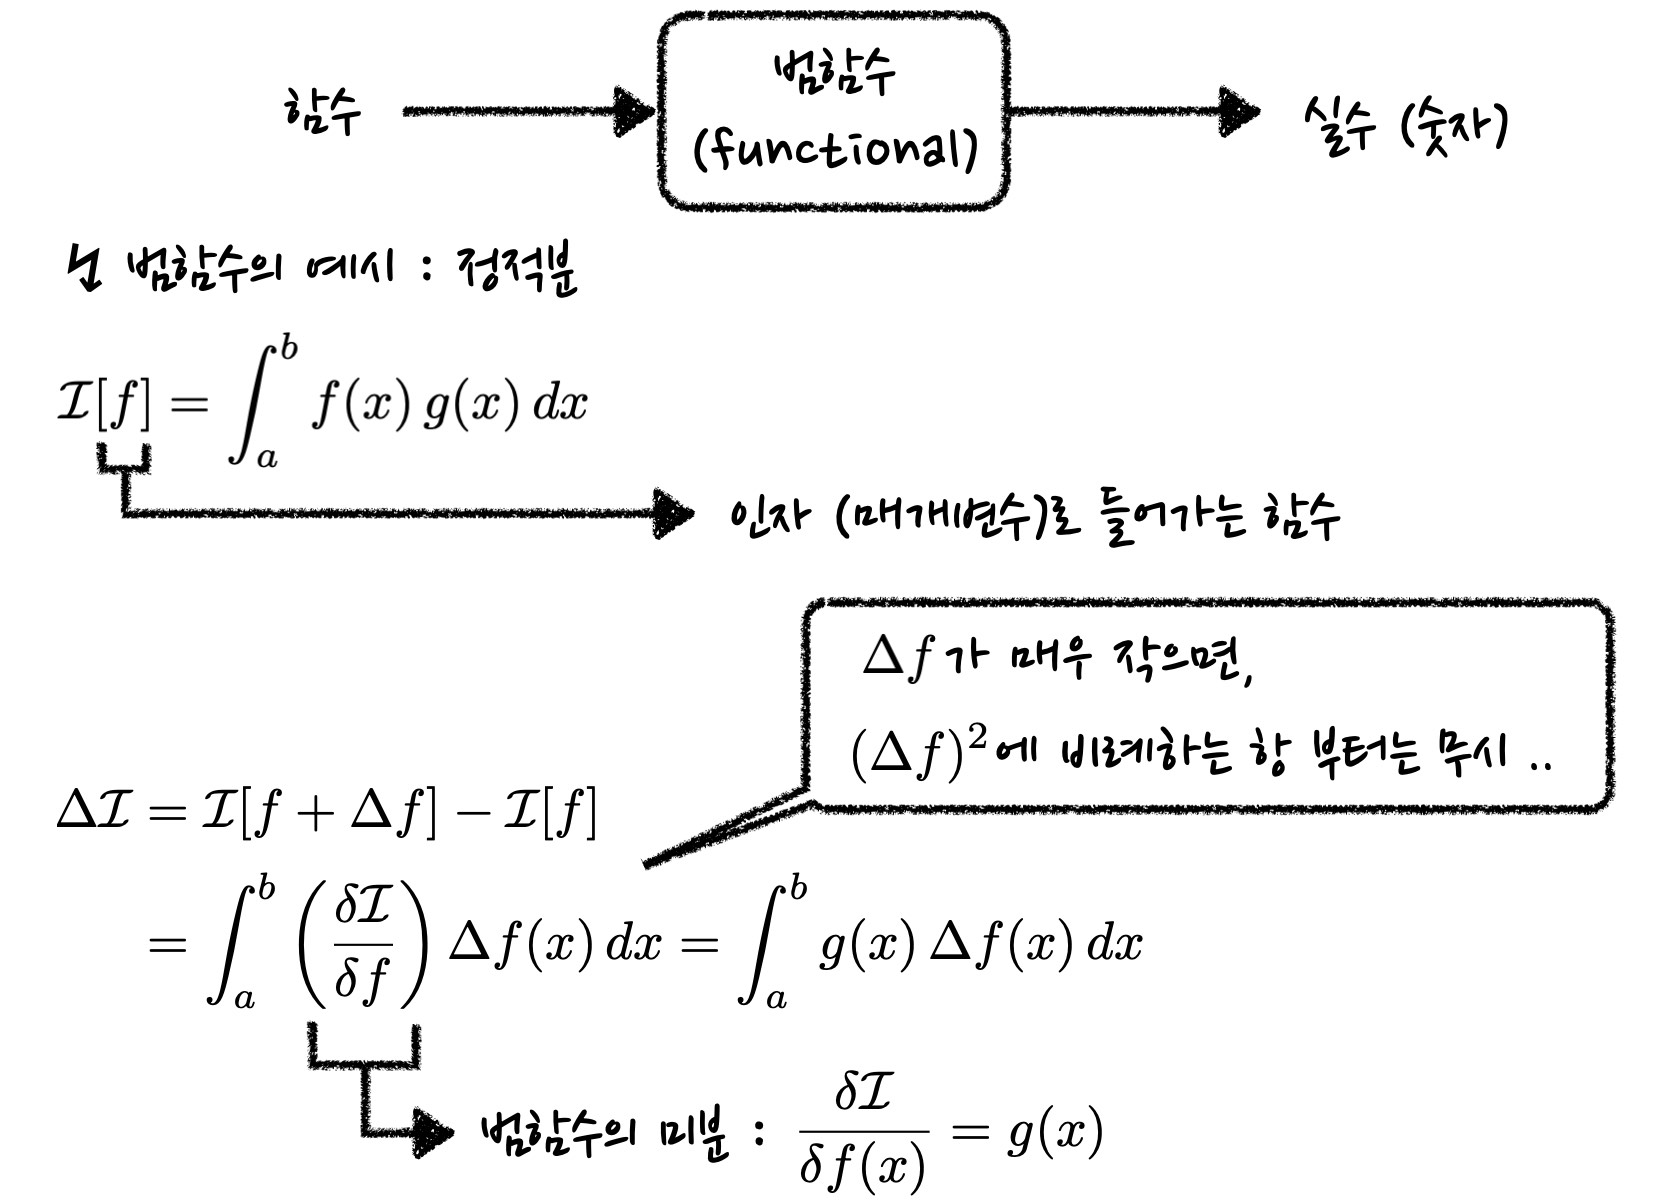 an example of functional, which is a definite integration of product of two functions. The functional derivative also can be derived in this case.